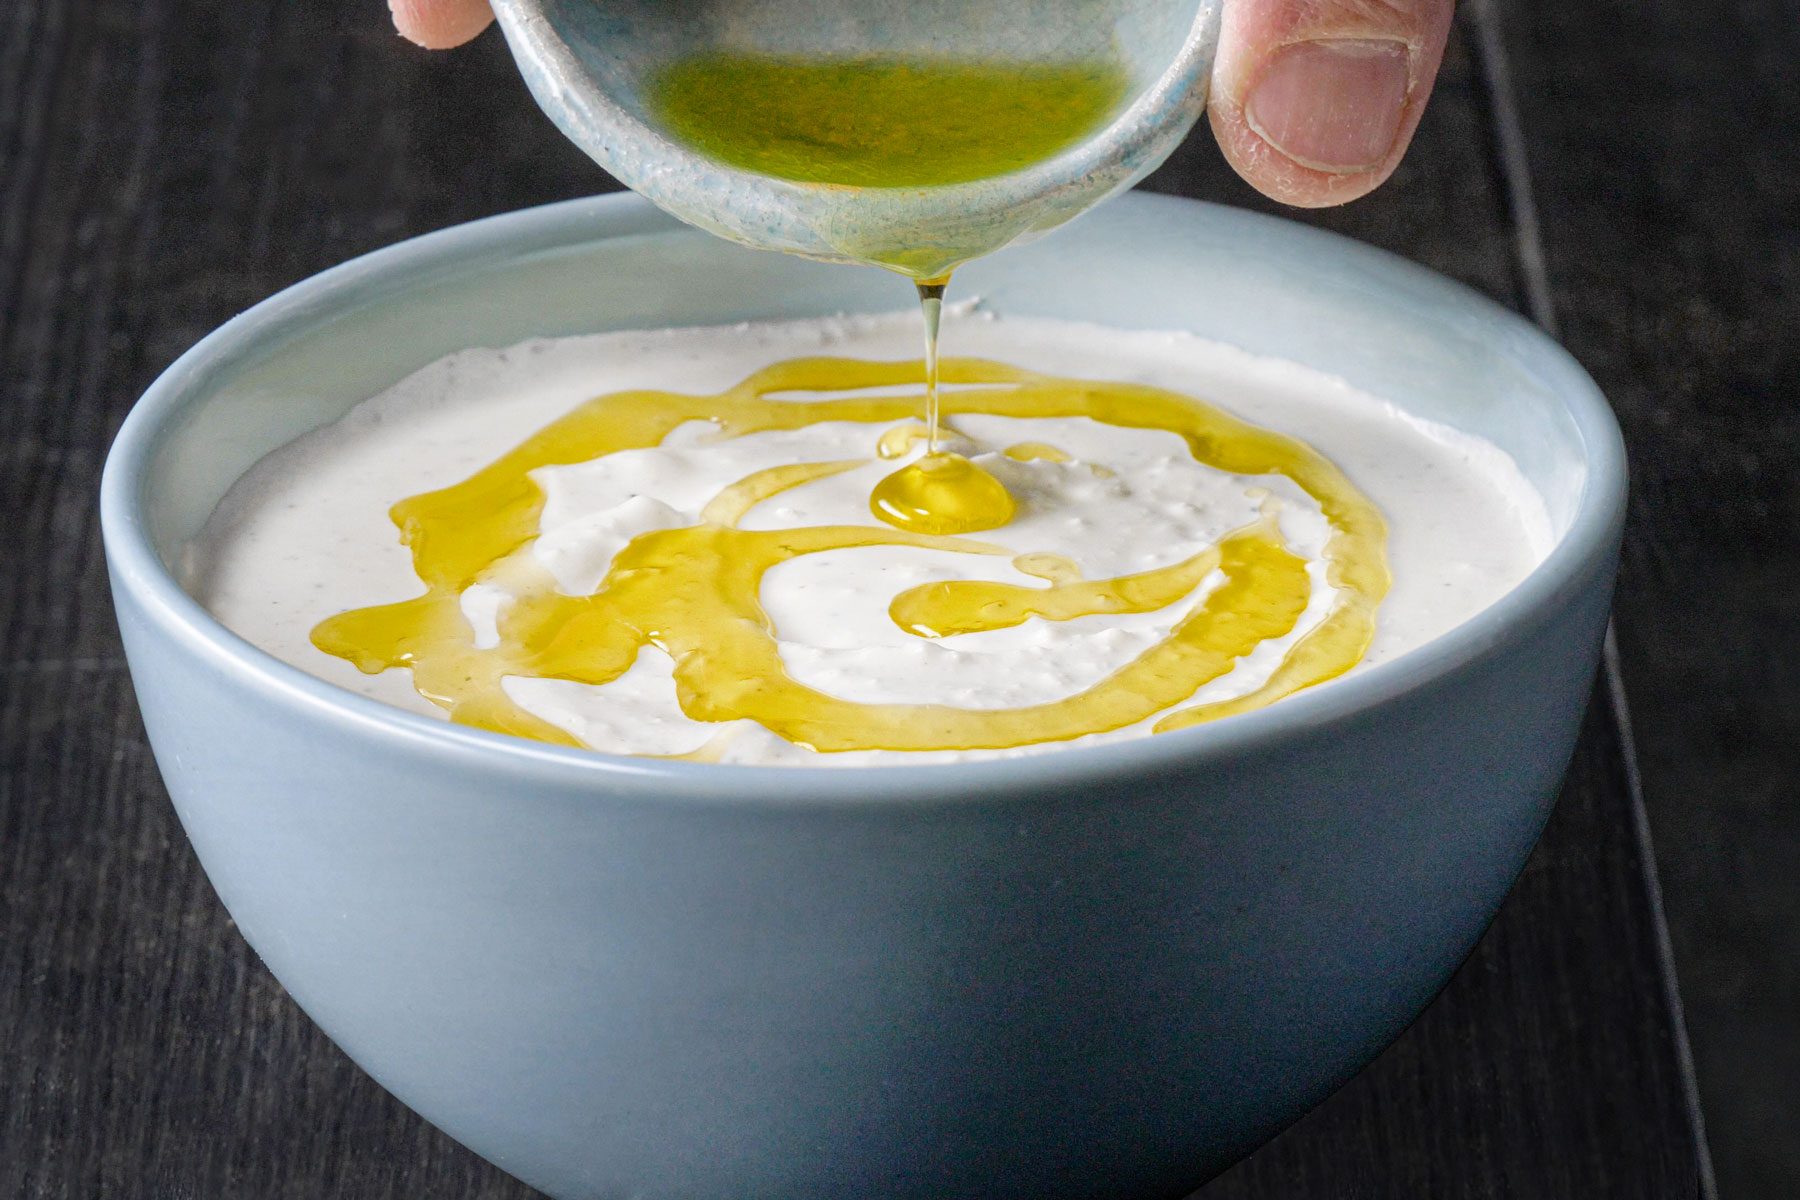 Drizzling oil over the Whipped Feta Dip in a small bowl